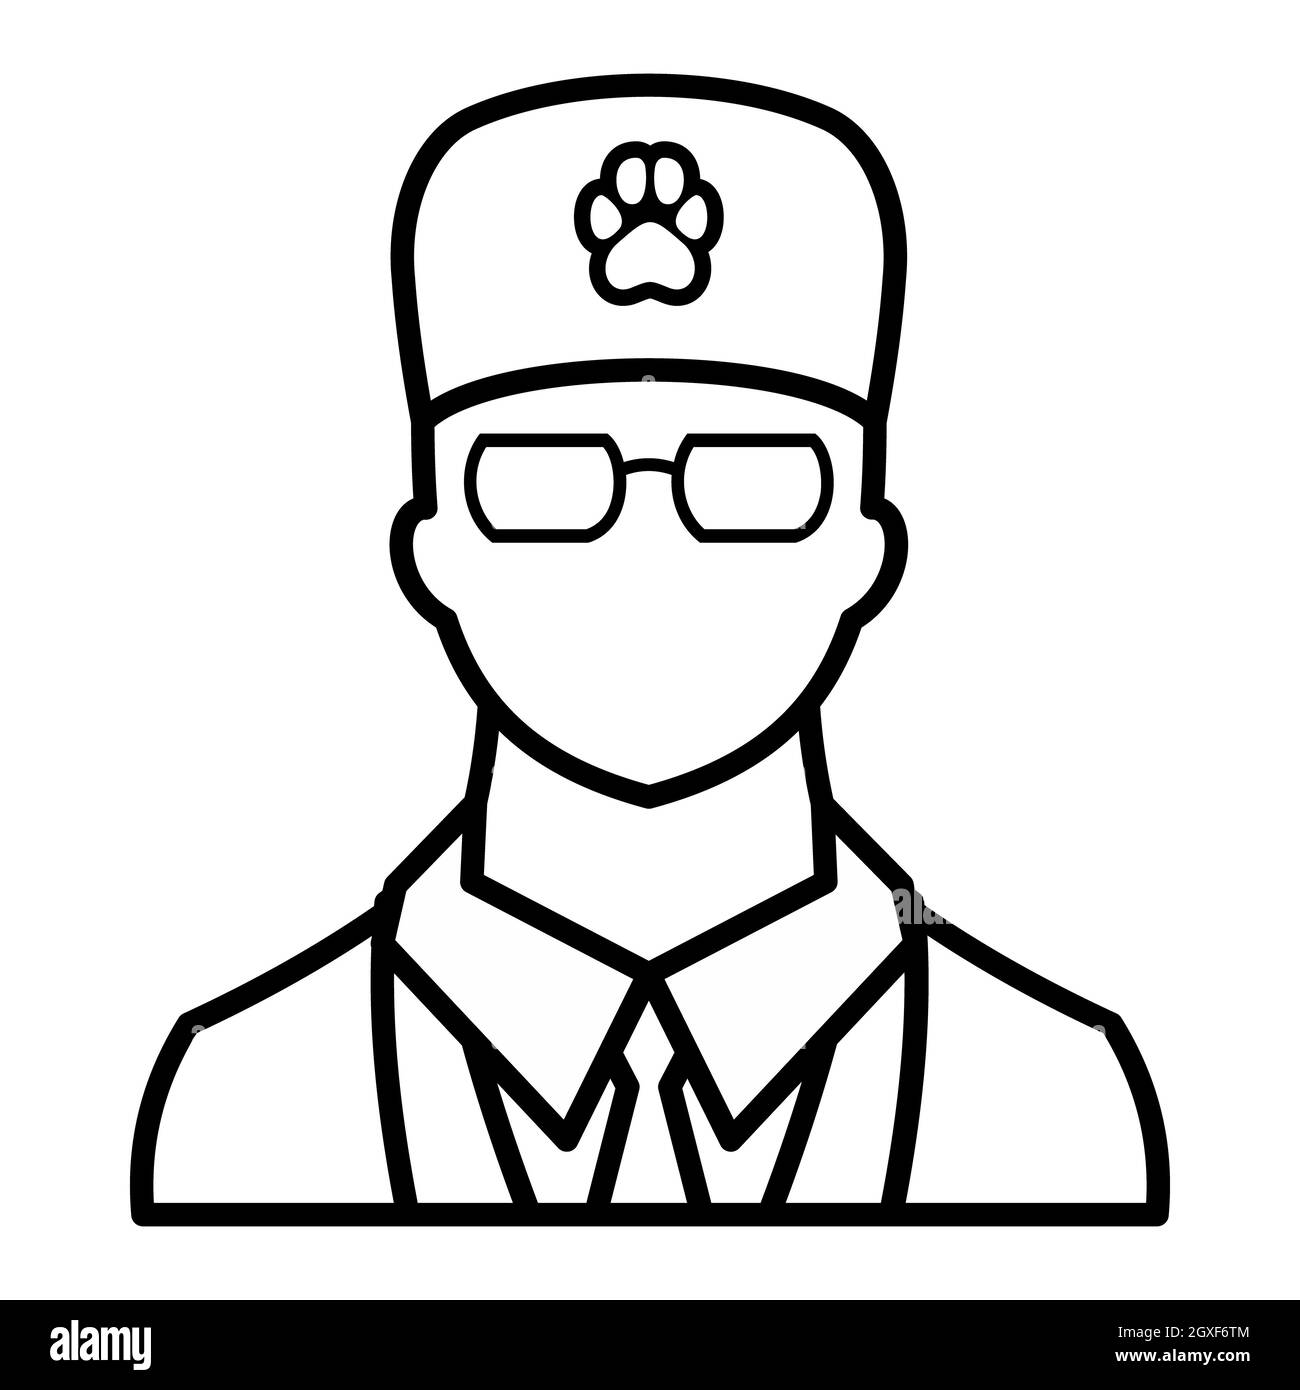 Veterinarian icon in outline style isolated on white background Stock Photo